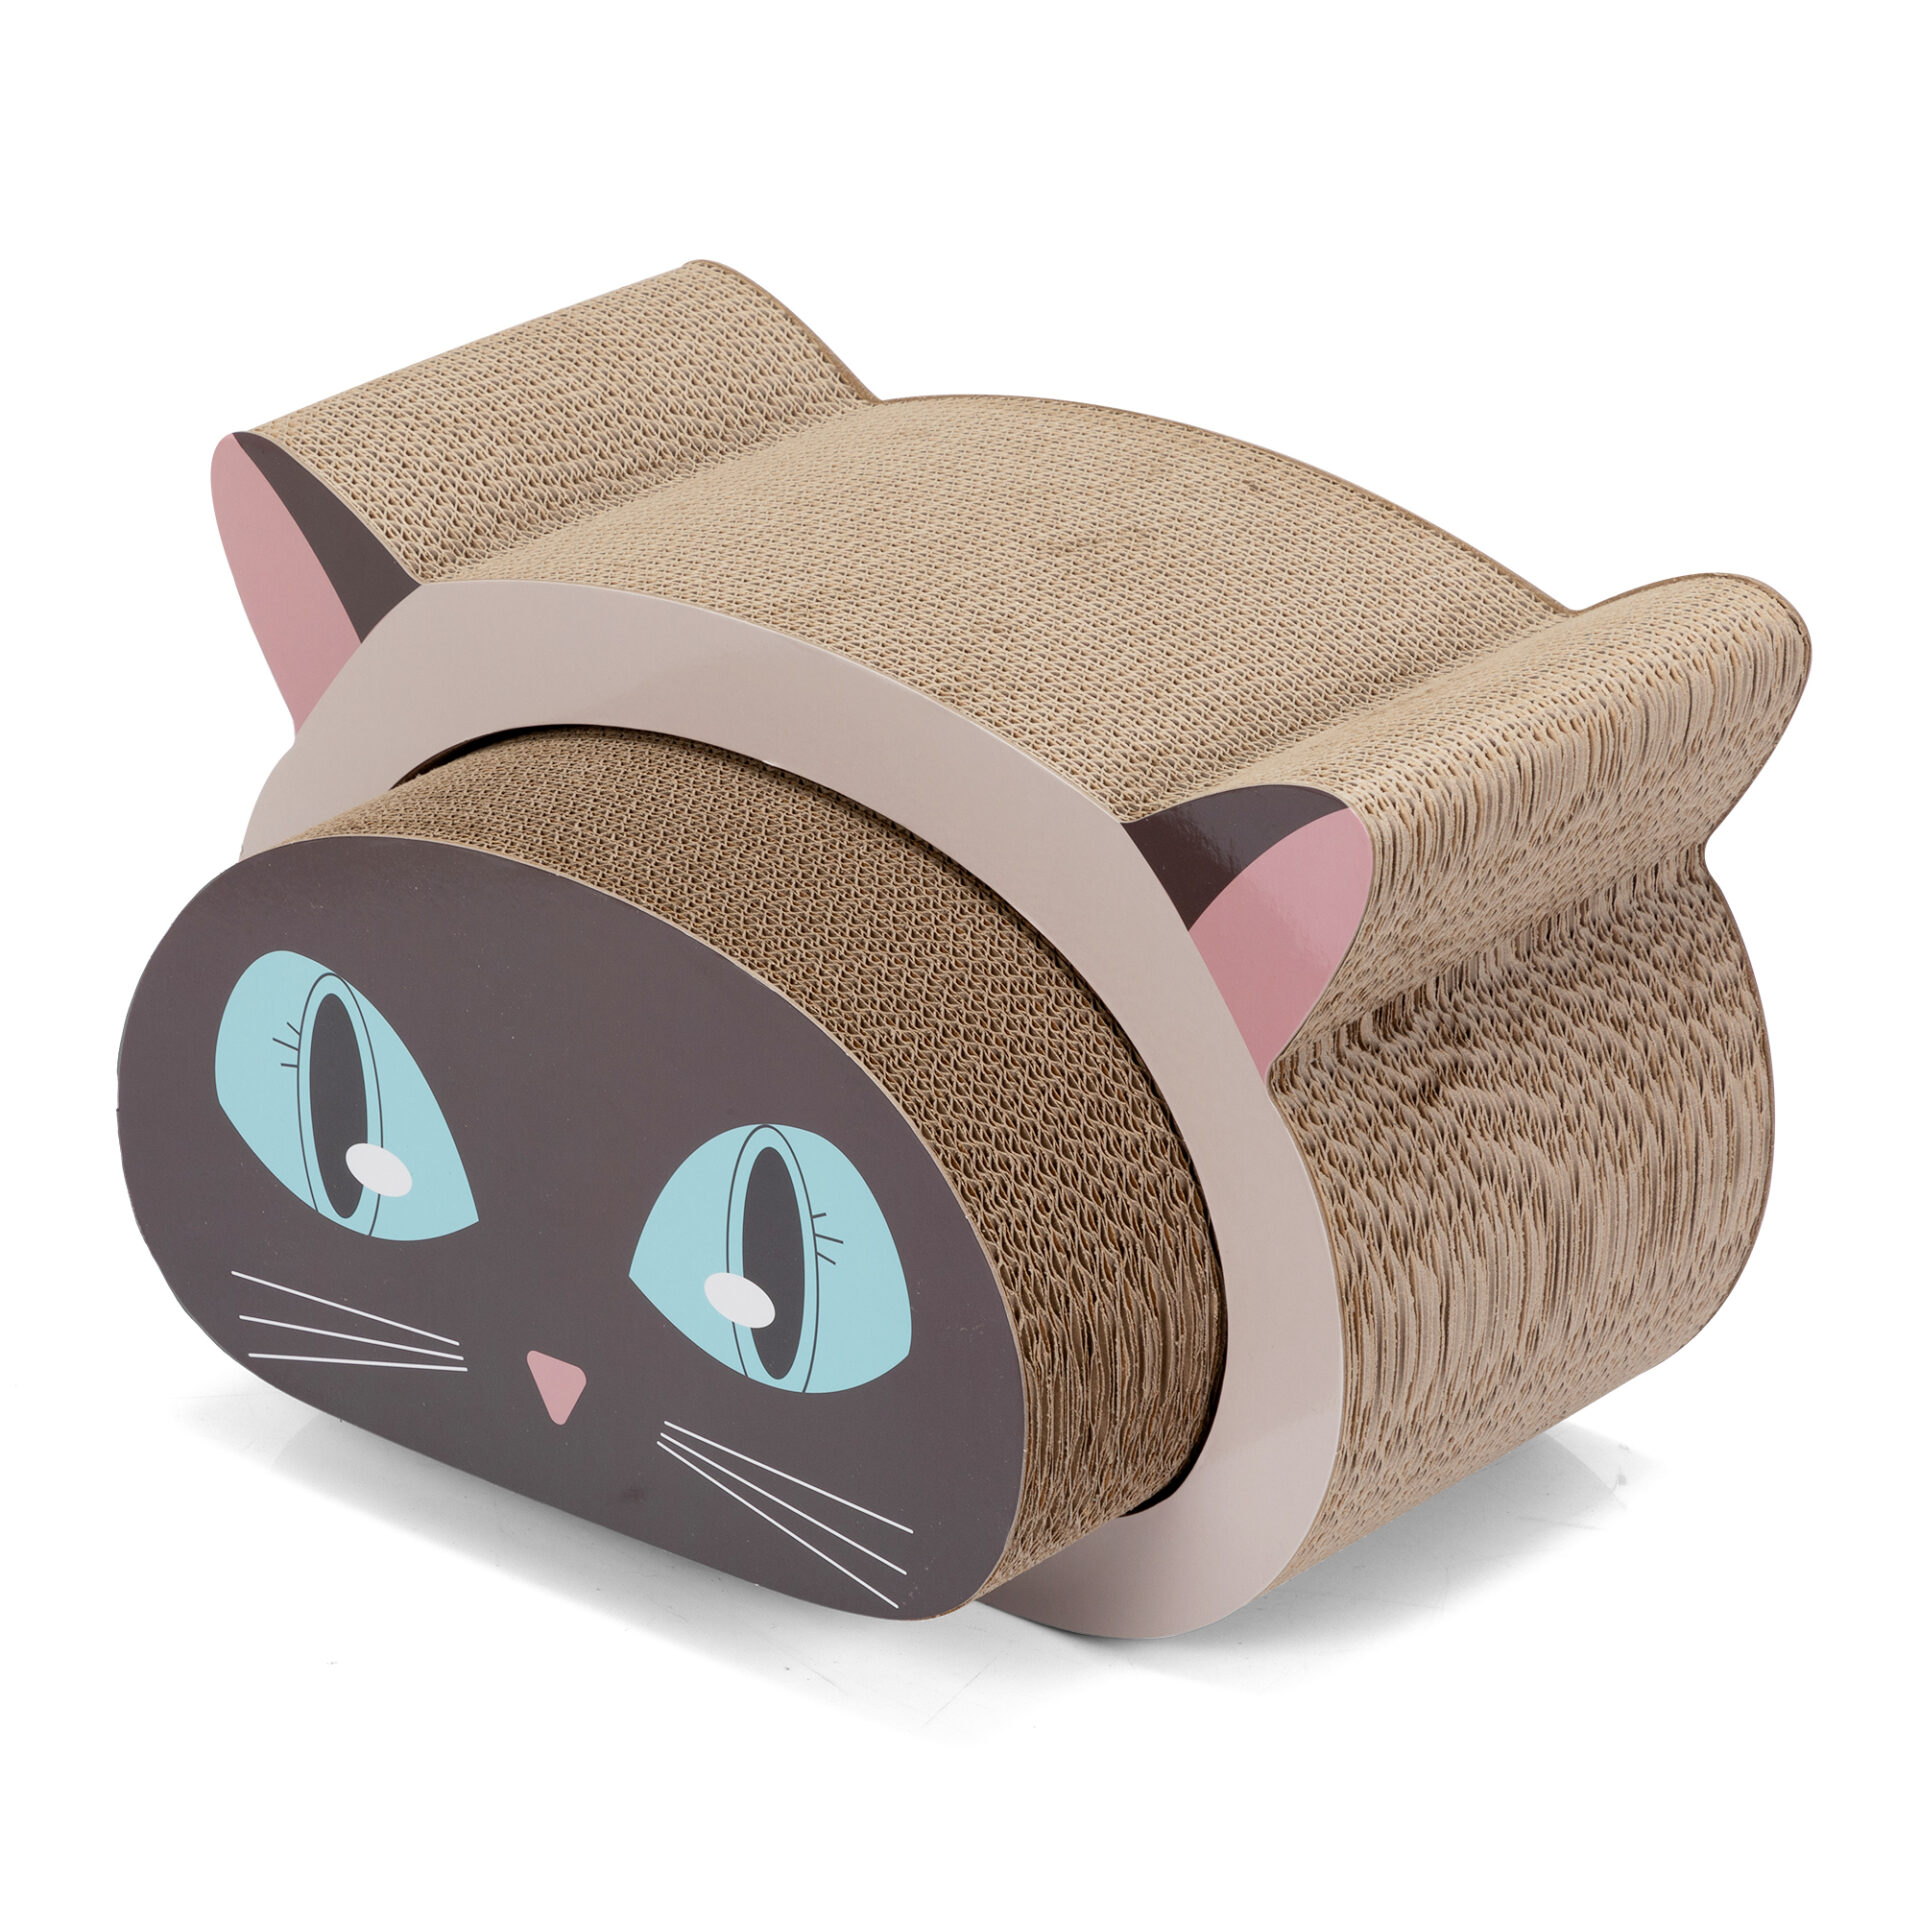 Coziwow 2-In-1 Cat-Head Shaped Cat Scratcher, Recyclable Corrugated Scratching Pad Bed, Cat Pattern CW12T0589 zt7